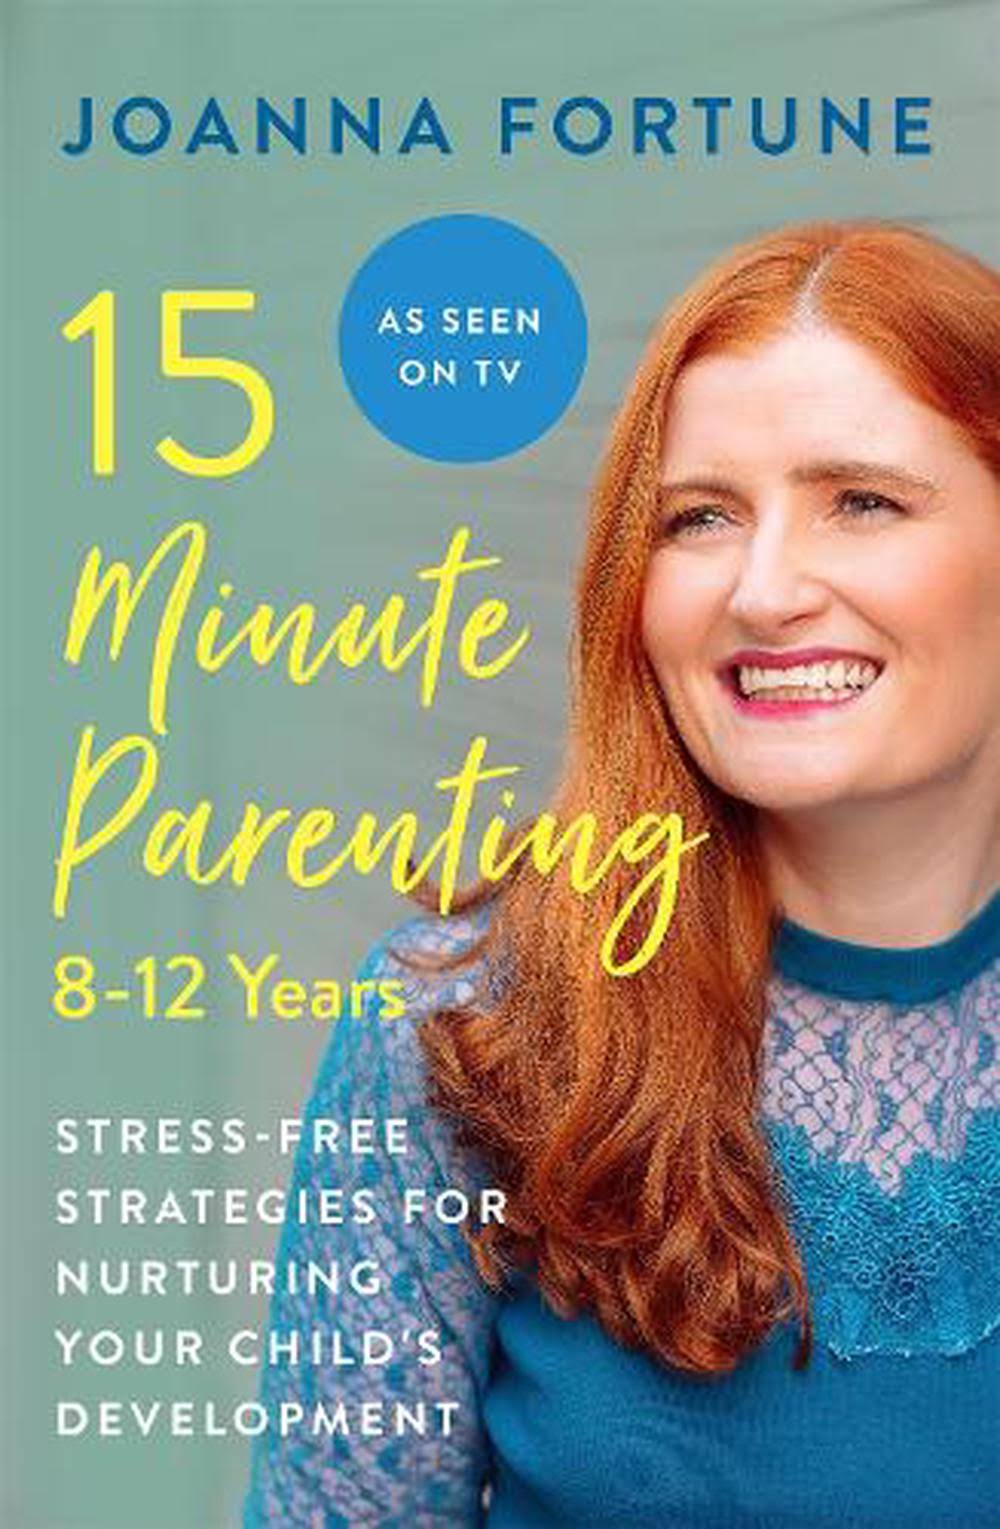 15-Minute Parenting: 8-12 Years by Joanna Fortune